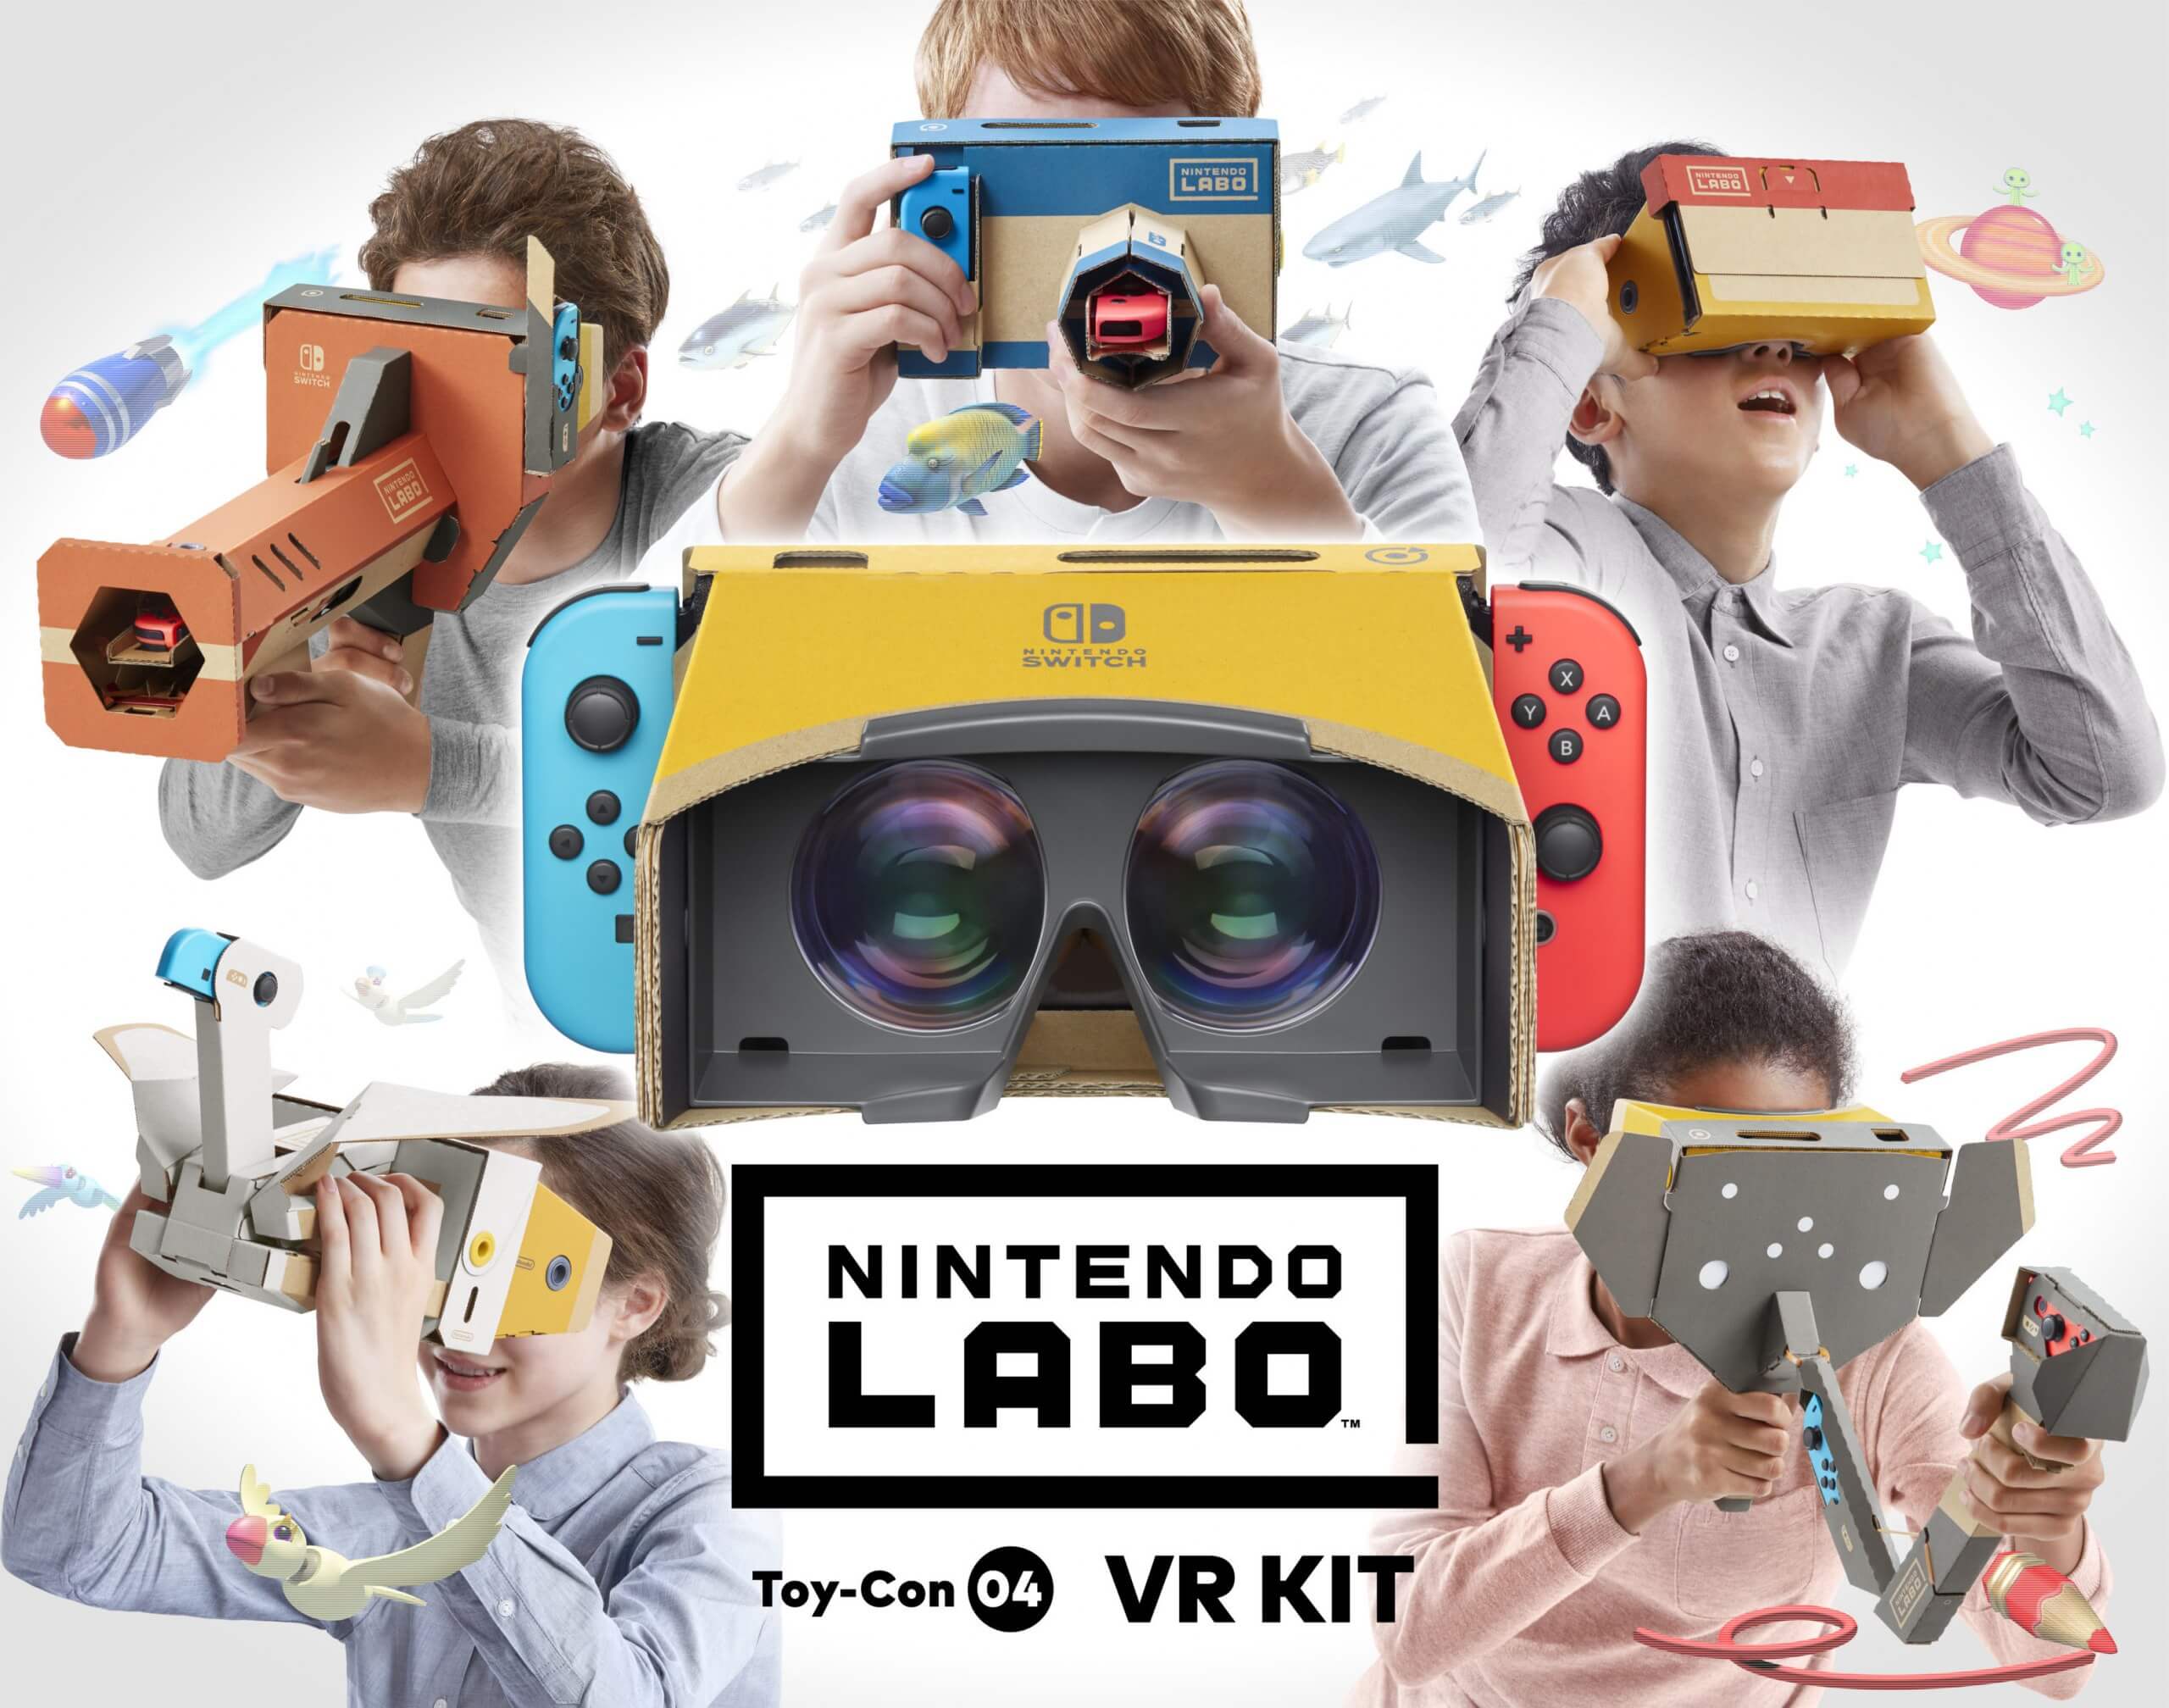 Mario and Zelda are coming to Nintendo Labo VR